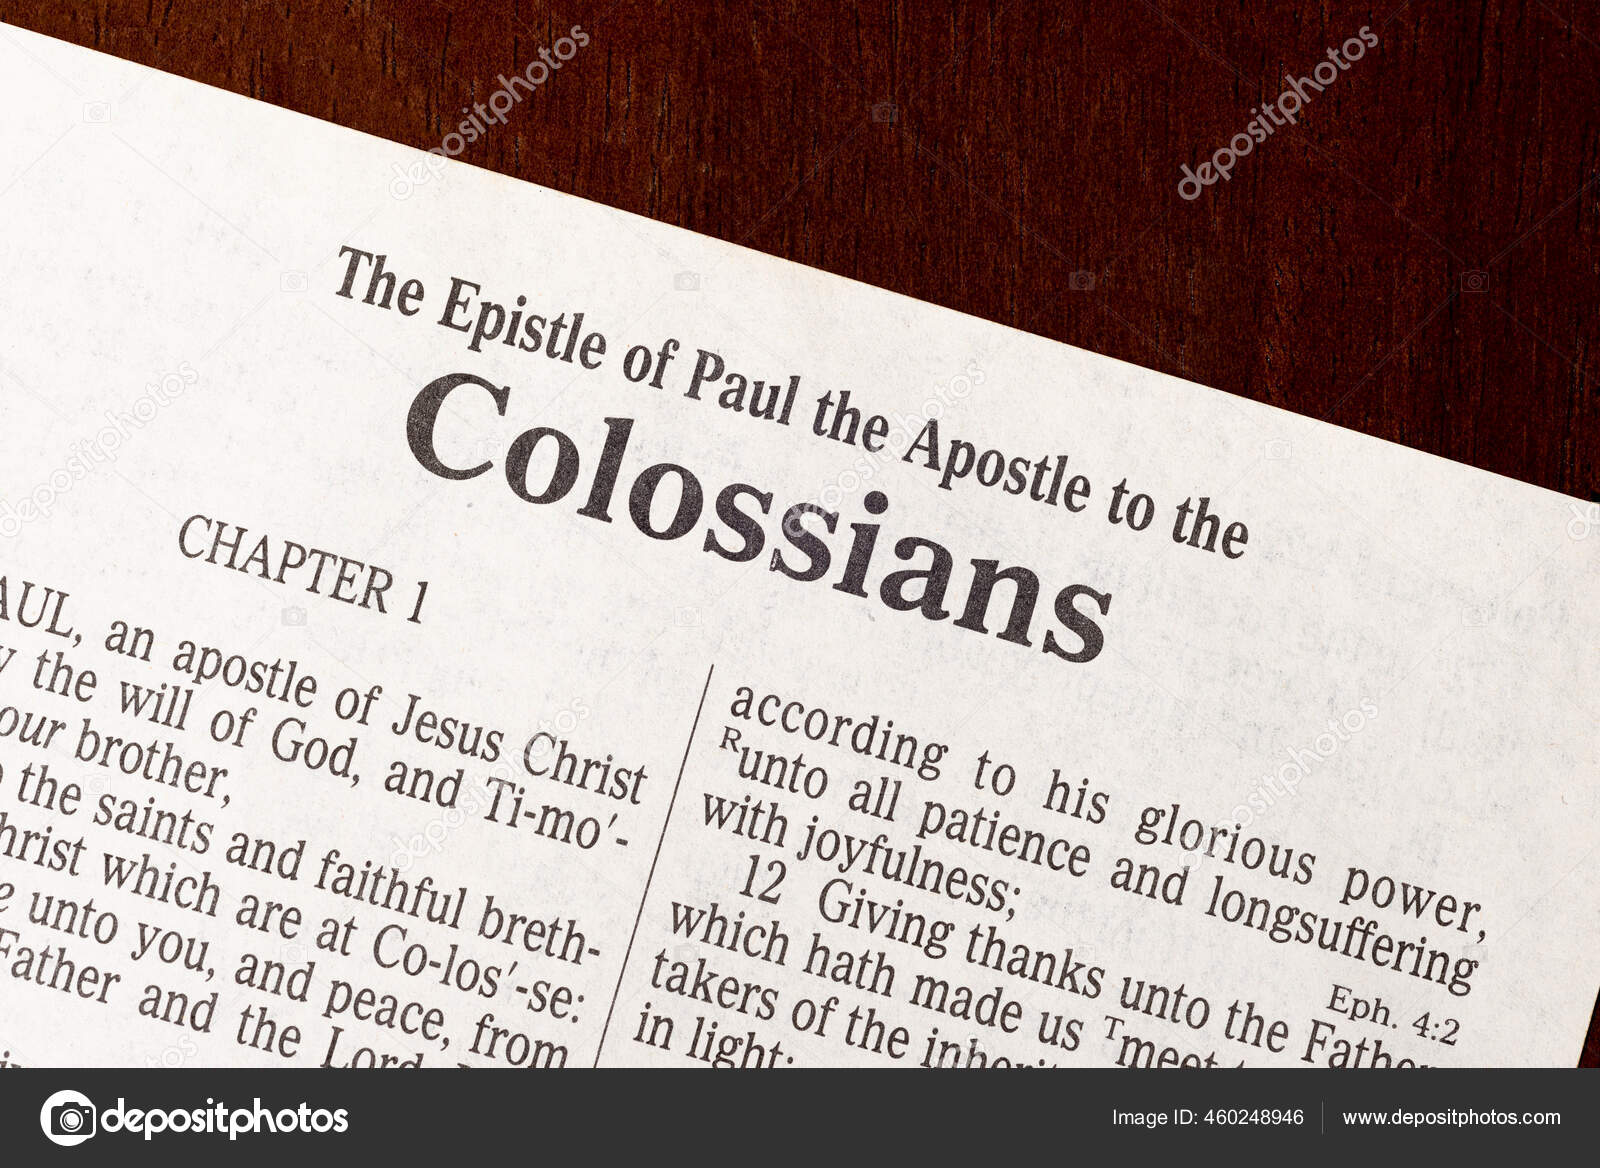 Wisdom and Redemption in Christ - Colossians 1: 9-14 Image